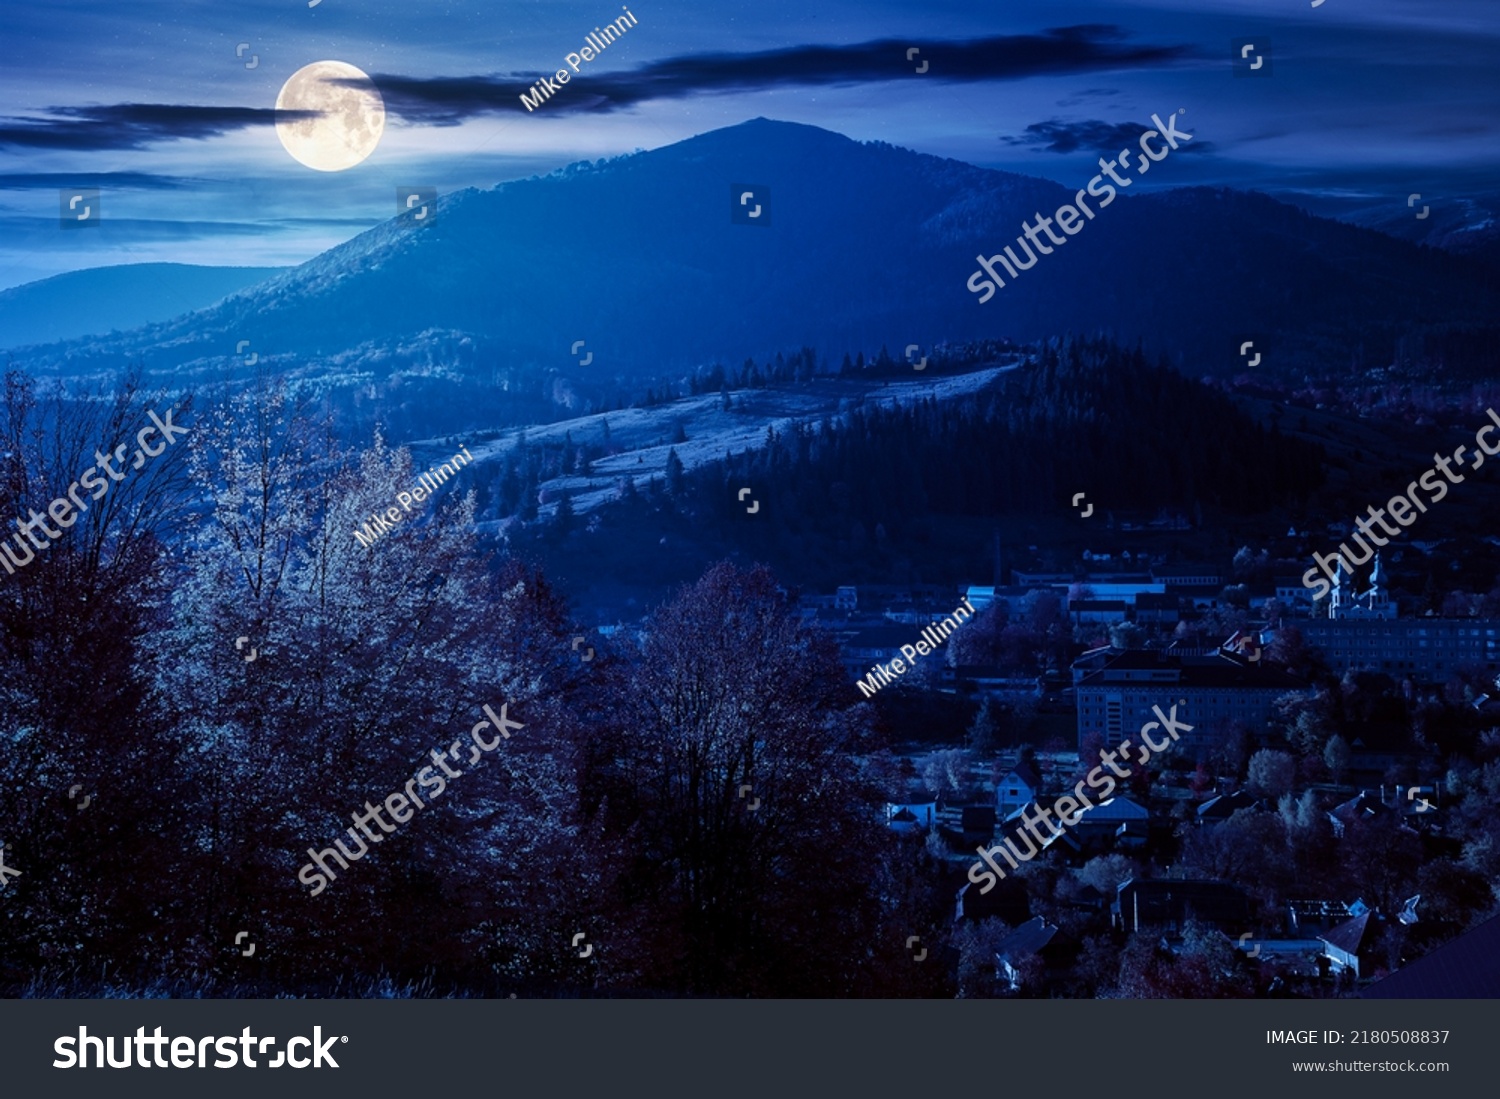 carpathian rural landscape in autumn at night. village in the valley at the foot of the mountain. beautiful countryside scenery in full moon light. trees in fall foliage on the grassy hills #2180508837